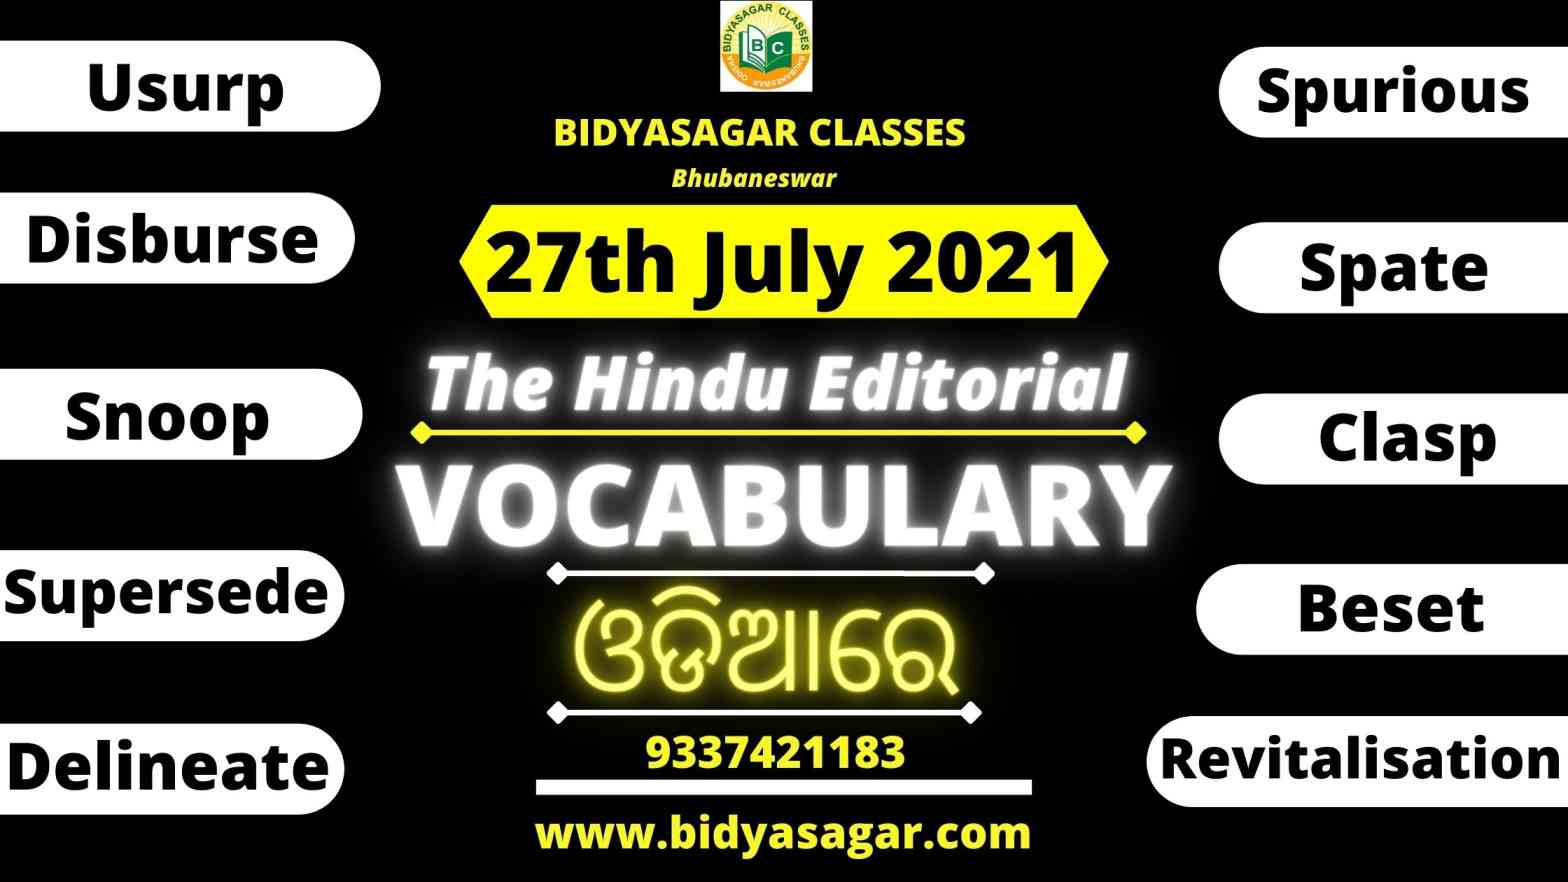 The Hindu Editorial Vocabulary of 27th July 2021